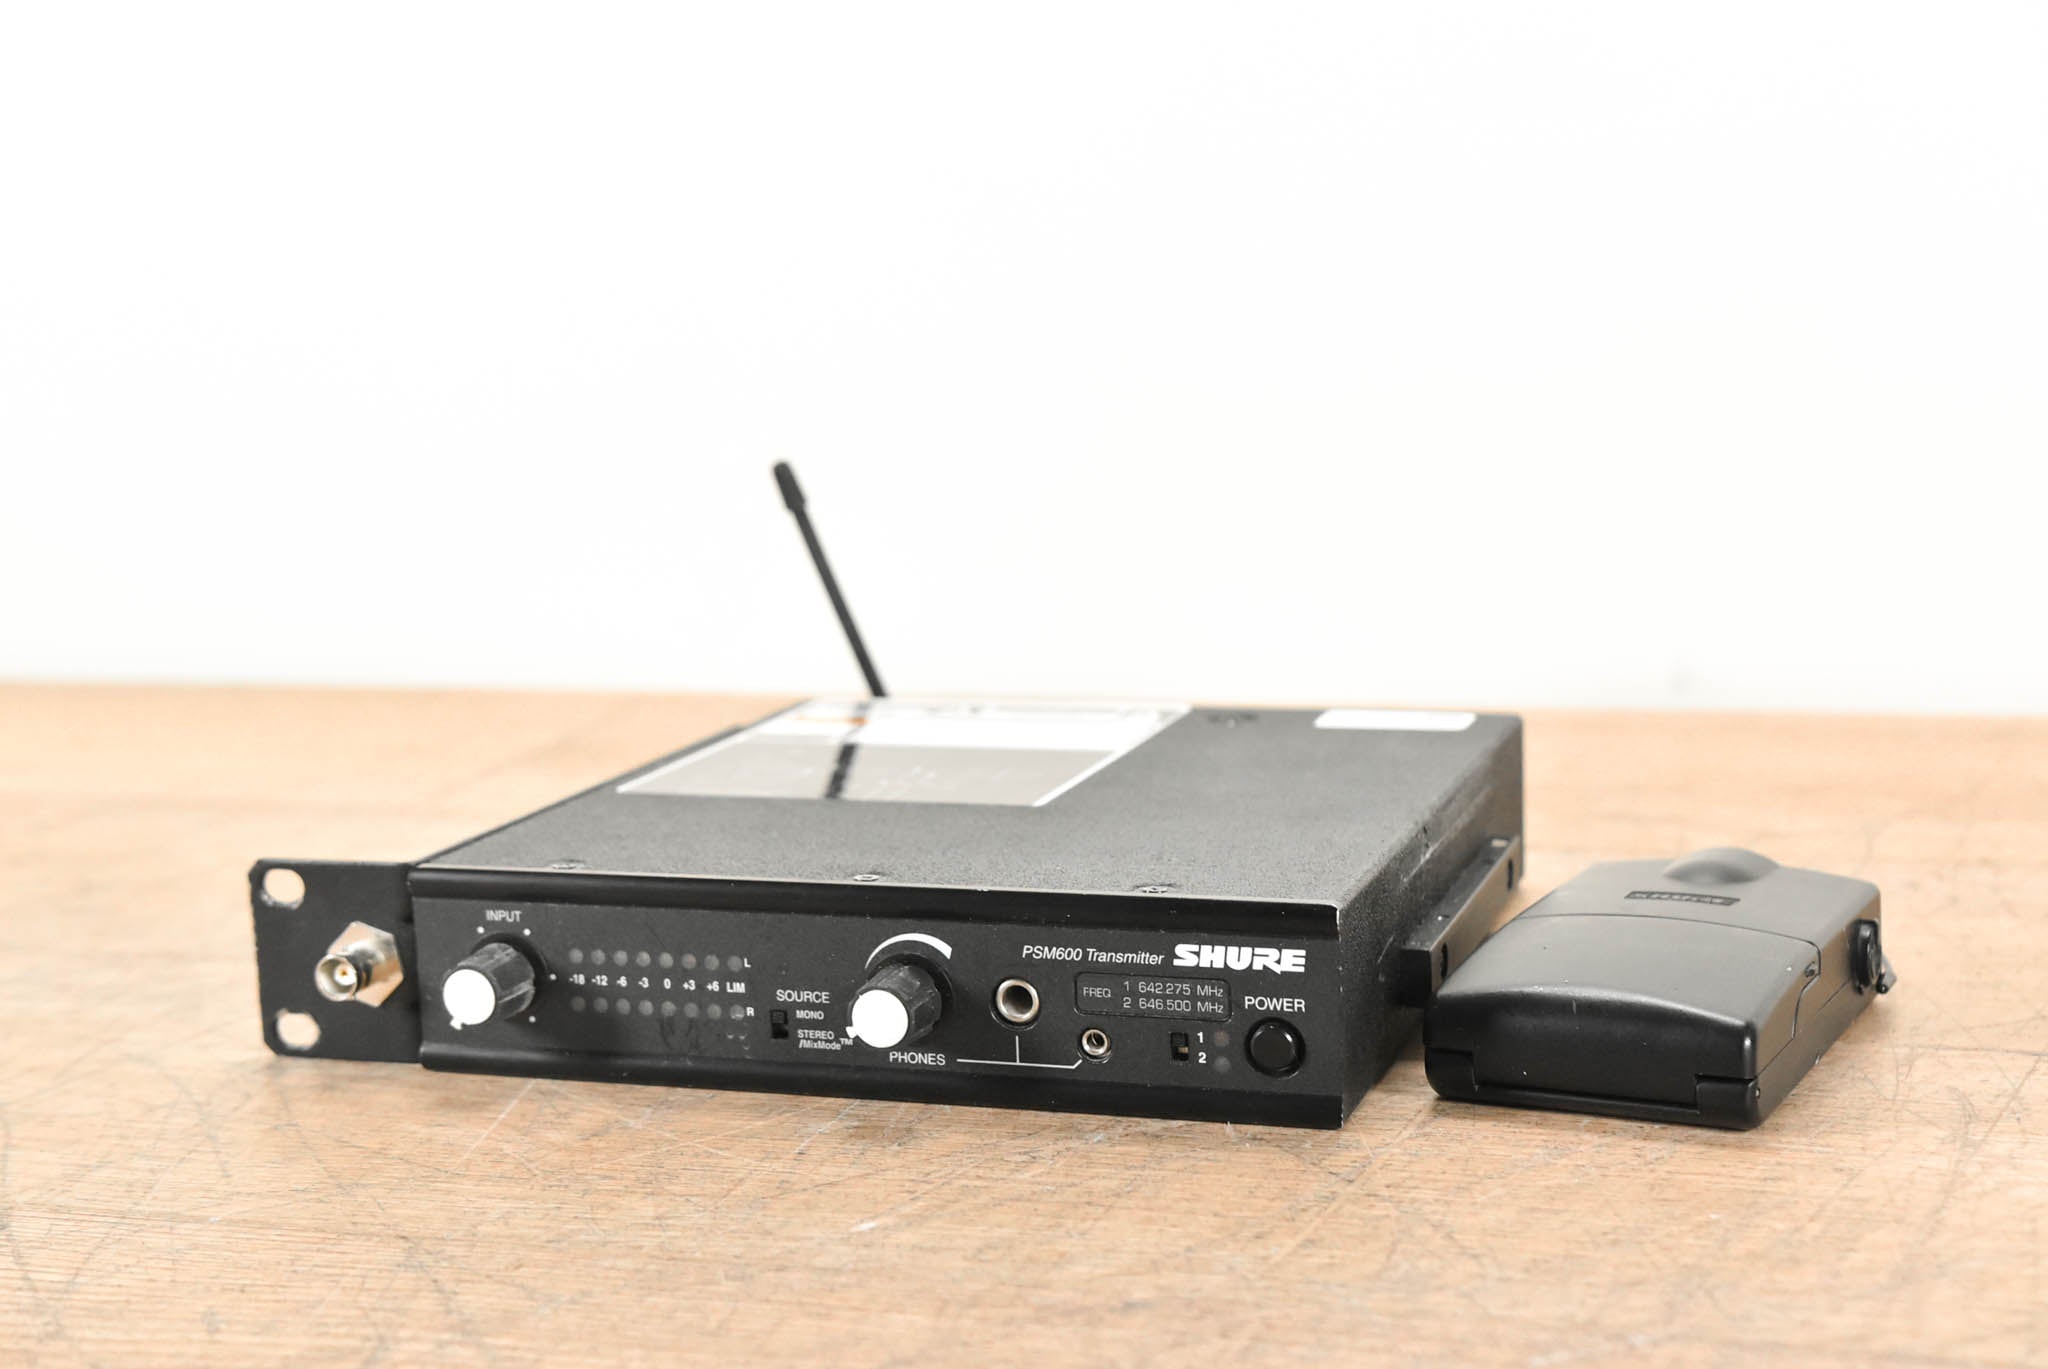 Shure PSM600 Wireless In-Ear Monitoring System - 642.275 and 646.500 MHz